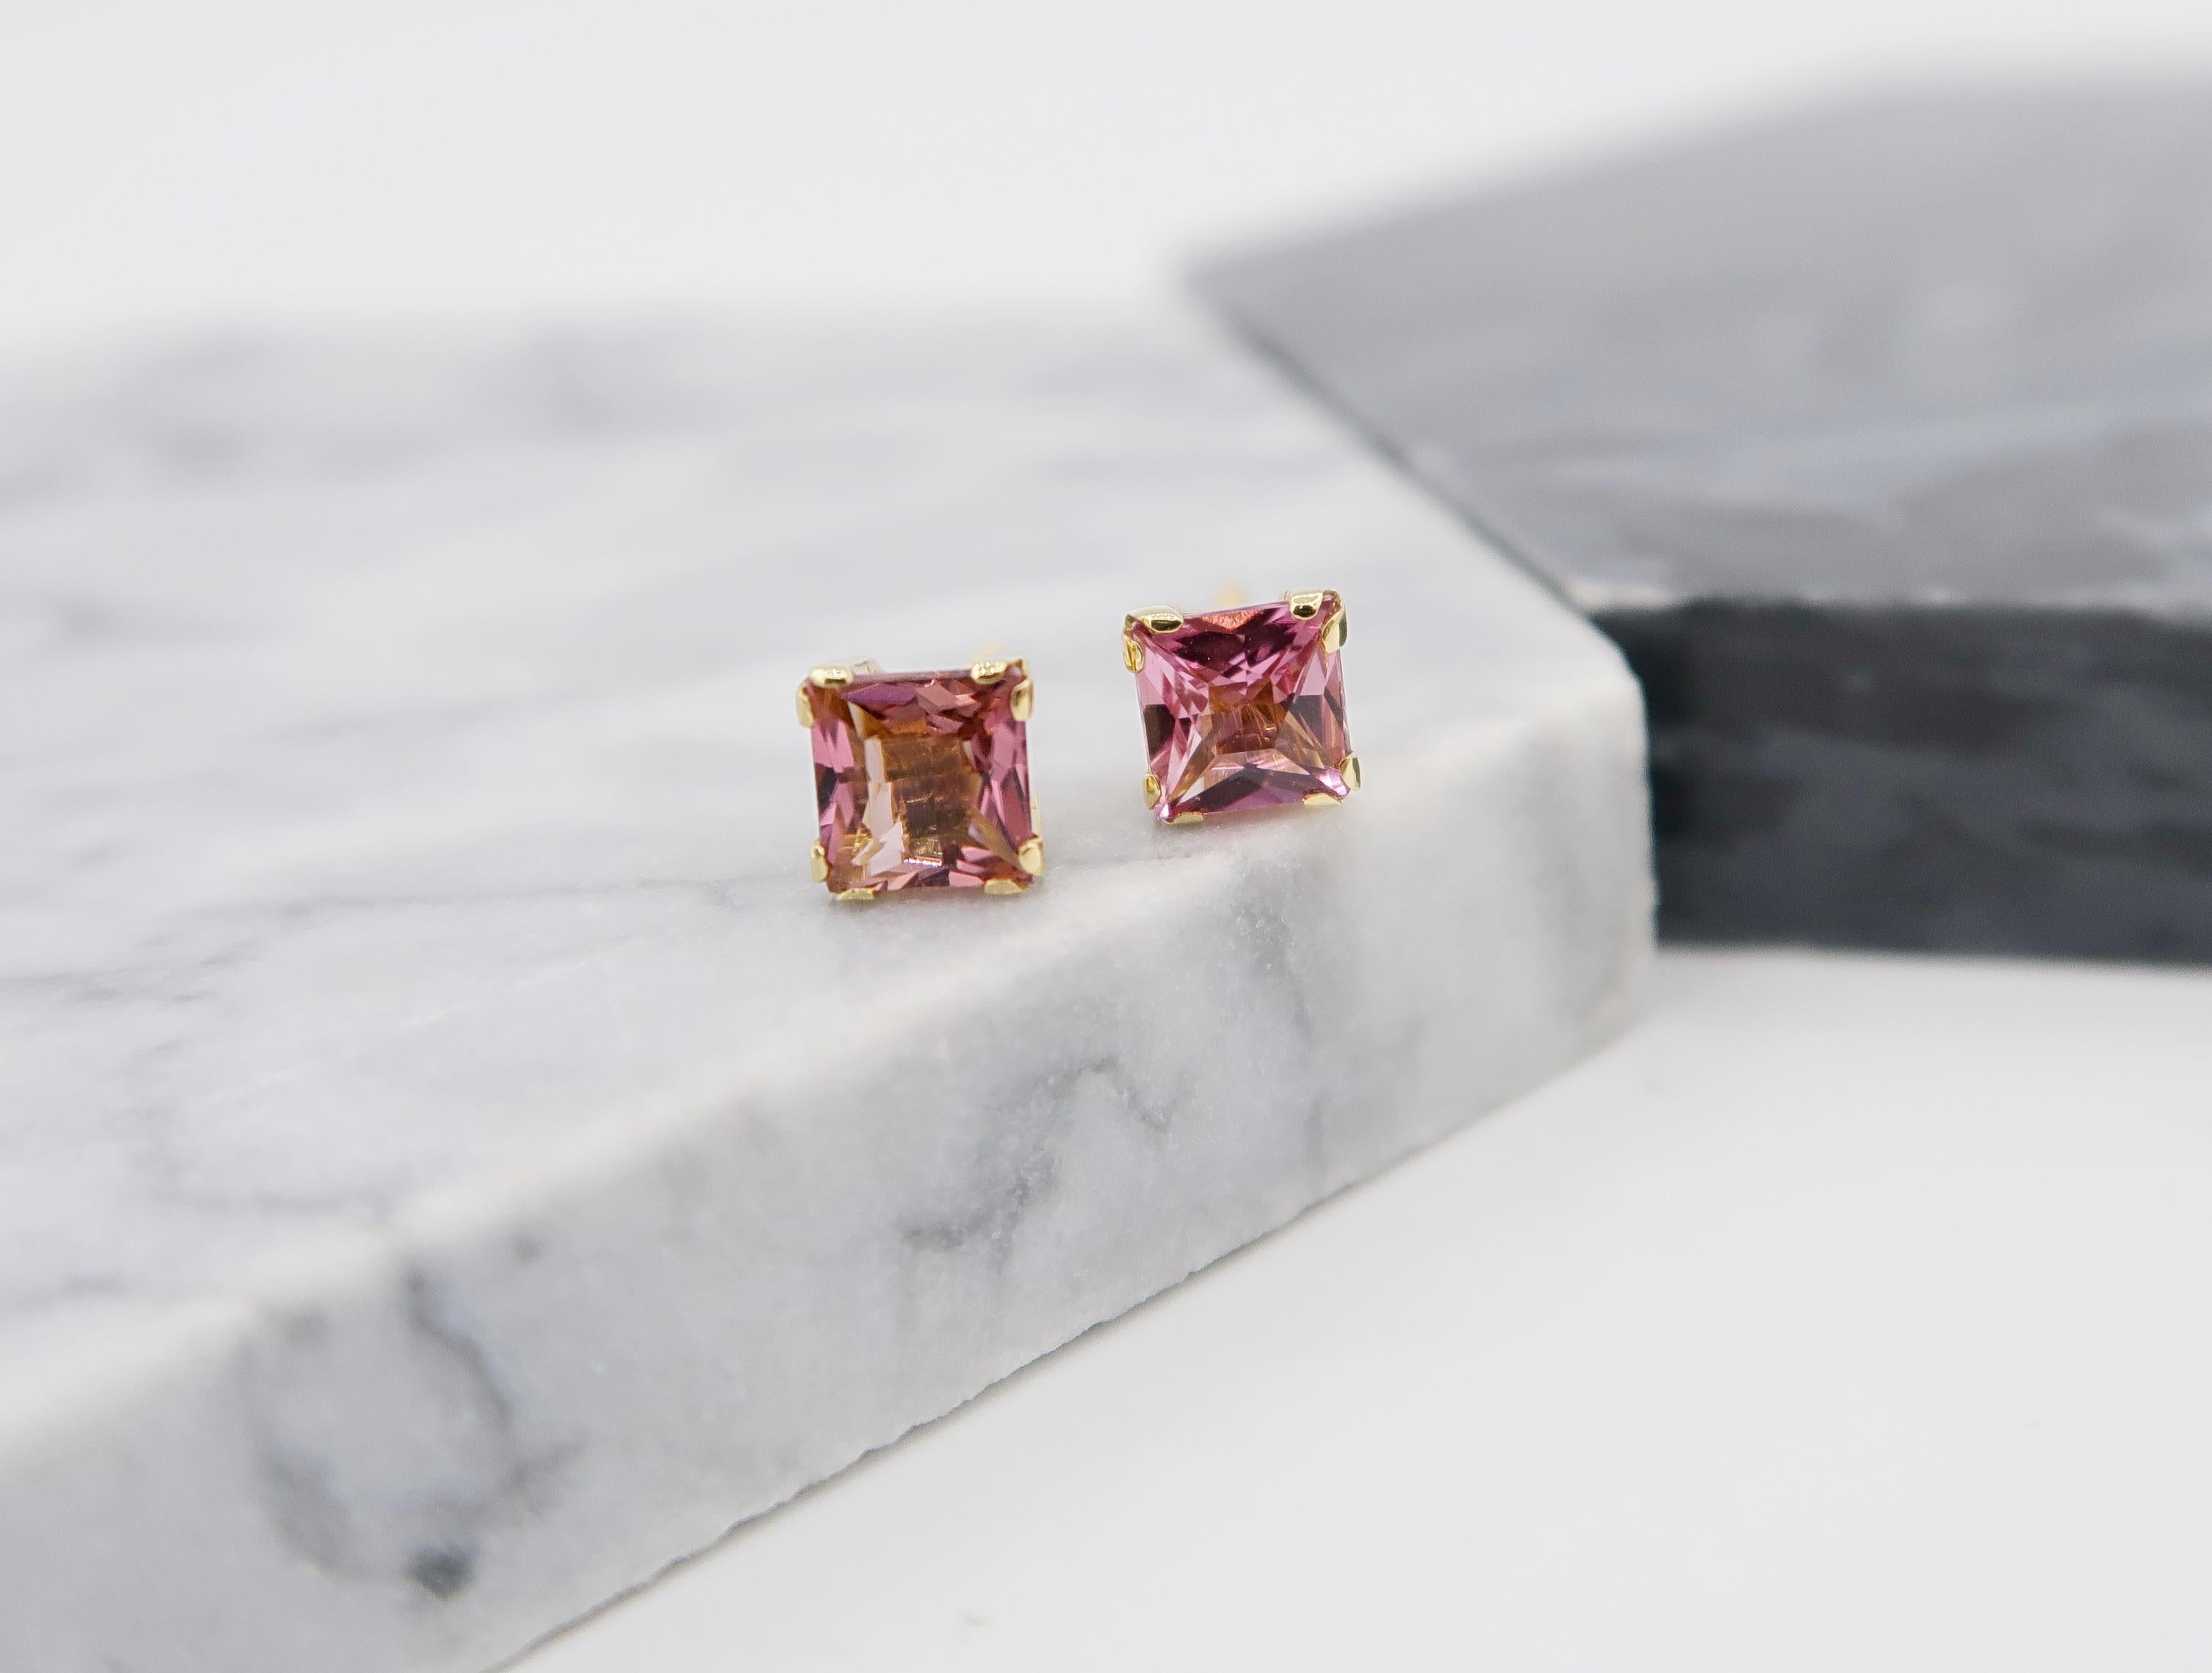 Square Pink Tourmaline Prong Stud Pierced Screw-Back Earrings in 18K Yellow Gold

Gold: 18K Yellow Gold 1.78 g
Pink Tourmaline: 1.30 ct